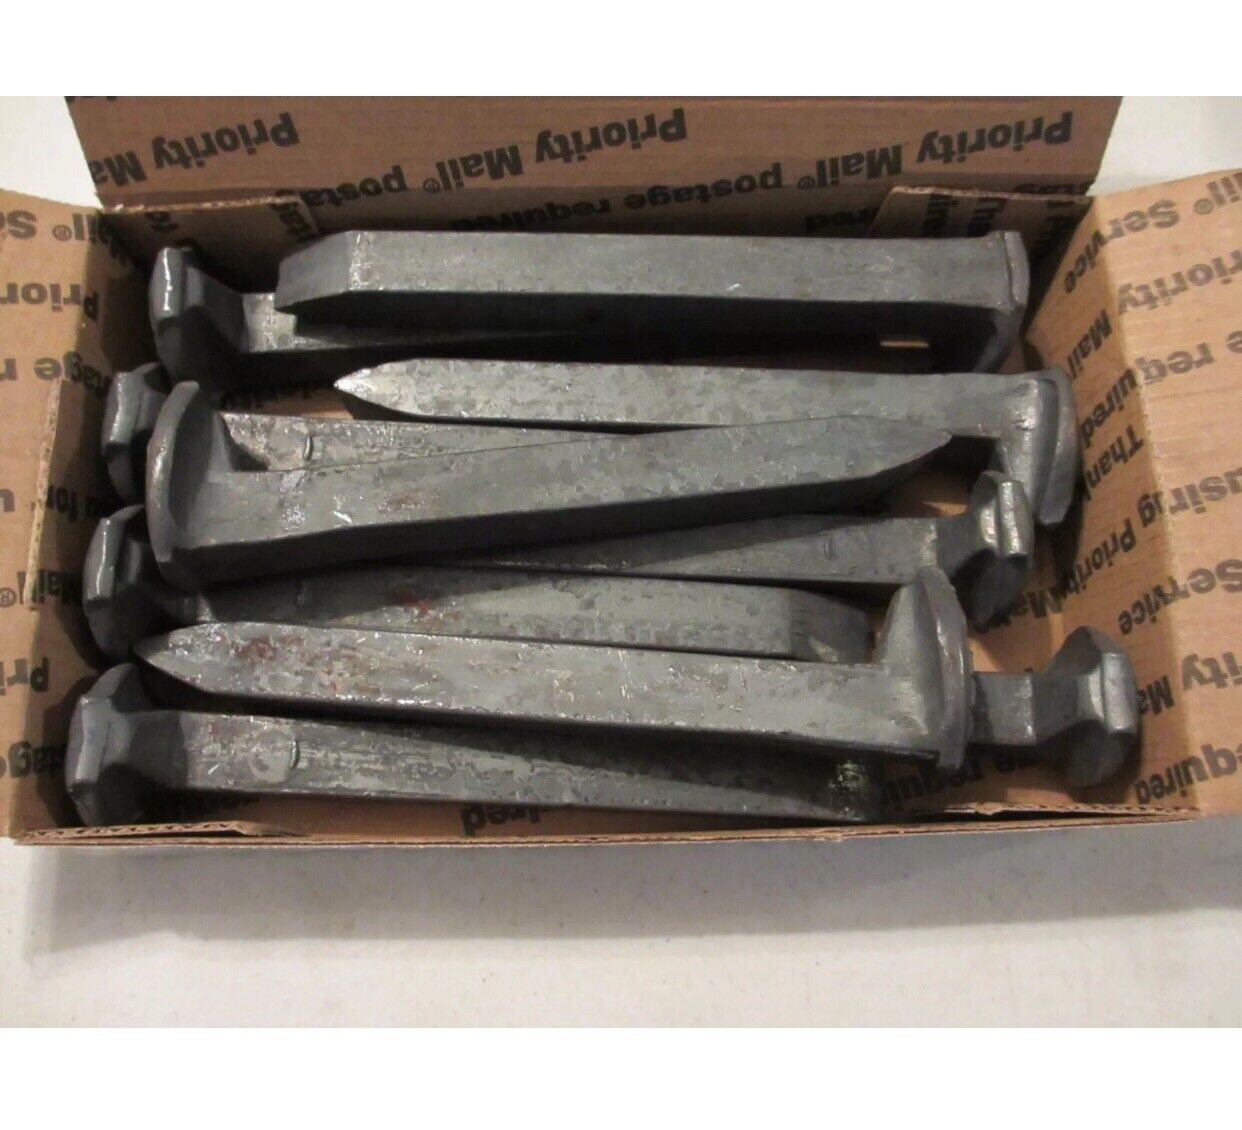 10 Railroad Spikes - Little Surface Rust - New - Never Used